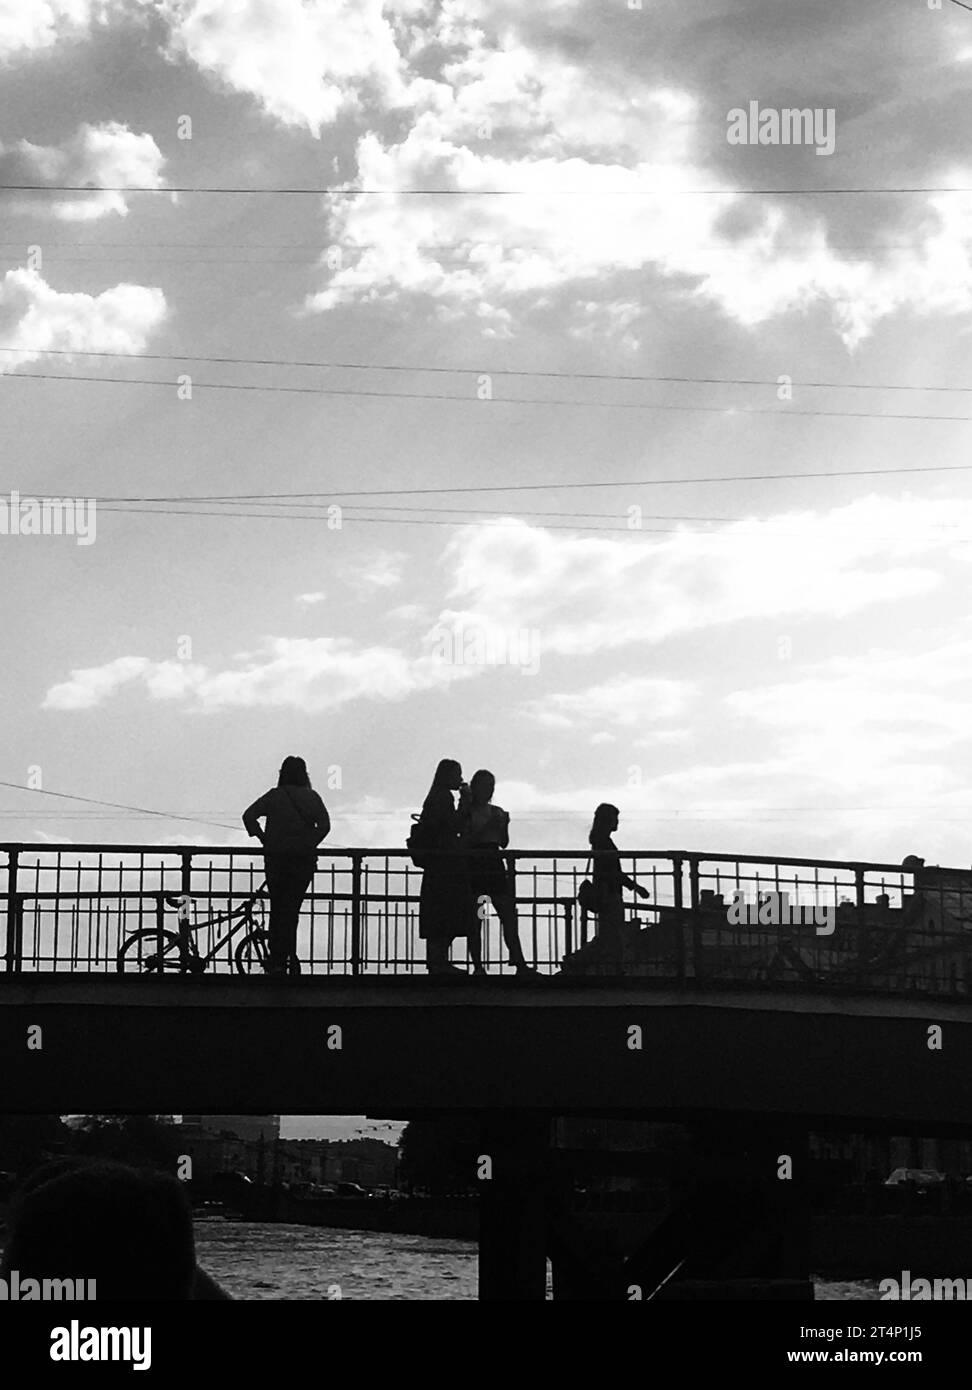 ST. PETERSBURG, RUSSIA, JUNE, 20, 2014. black and white photo of a bridge with people standing on it Stock Photo